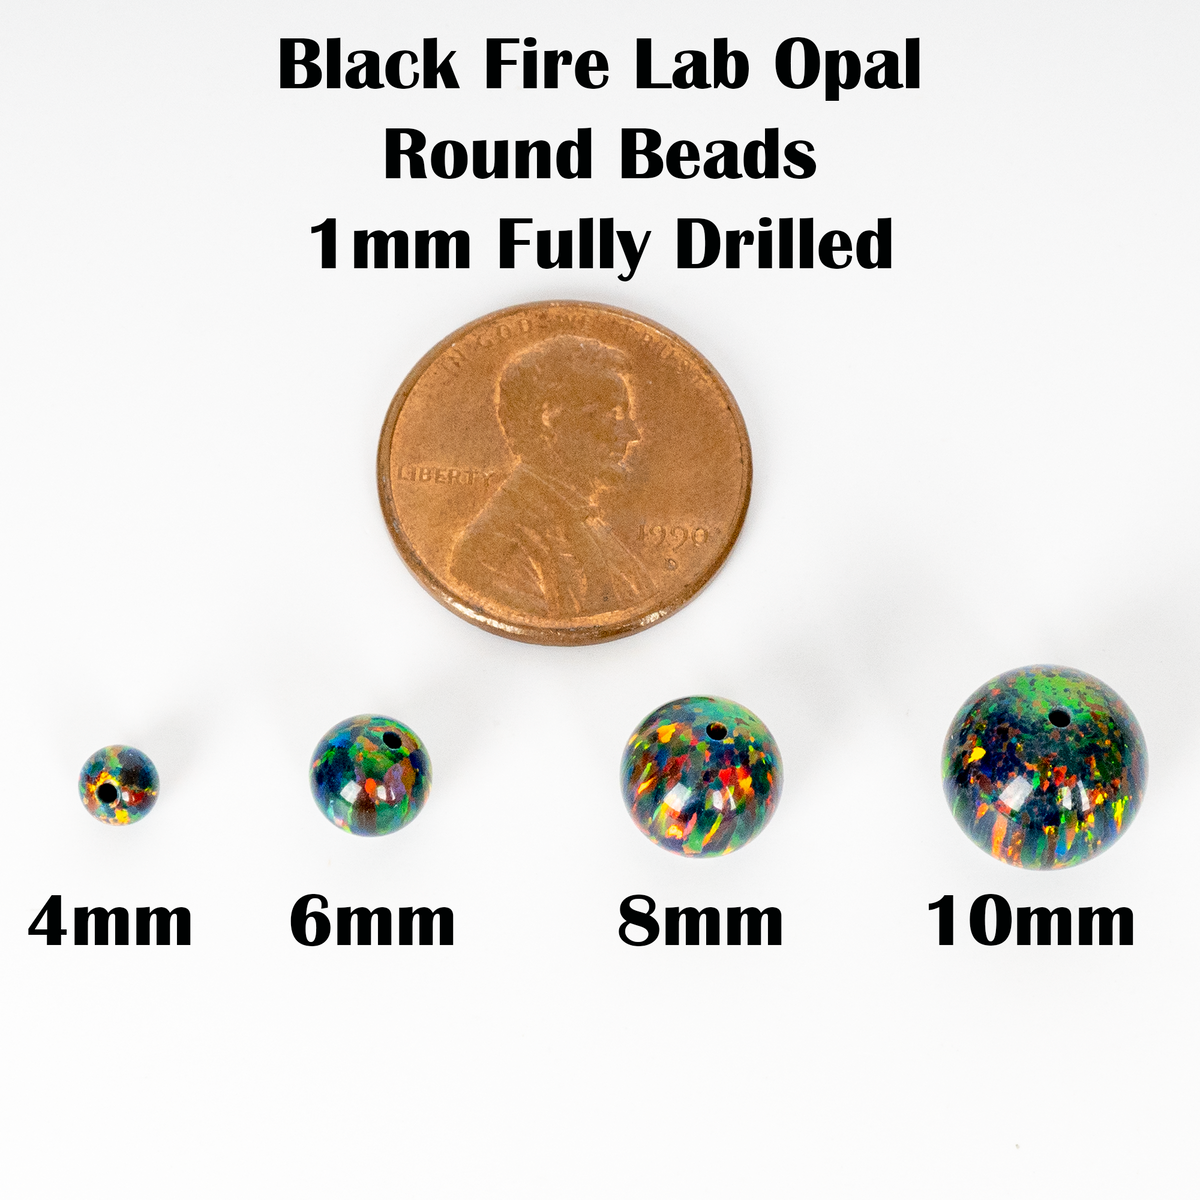 AAA+ Quality Black Opal, Natural Fire Opal Smooth Round Sphere Ball Beads,  8mm, 15pc